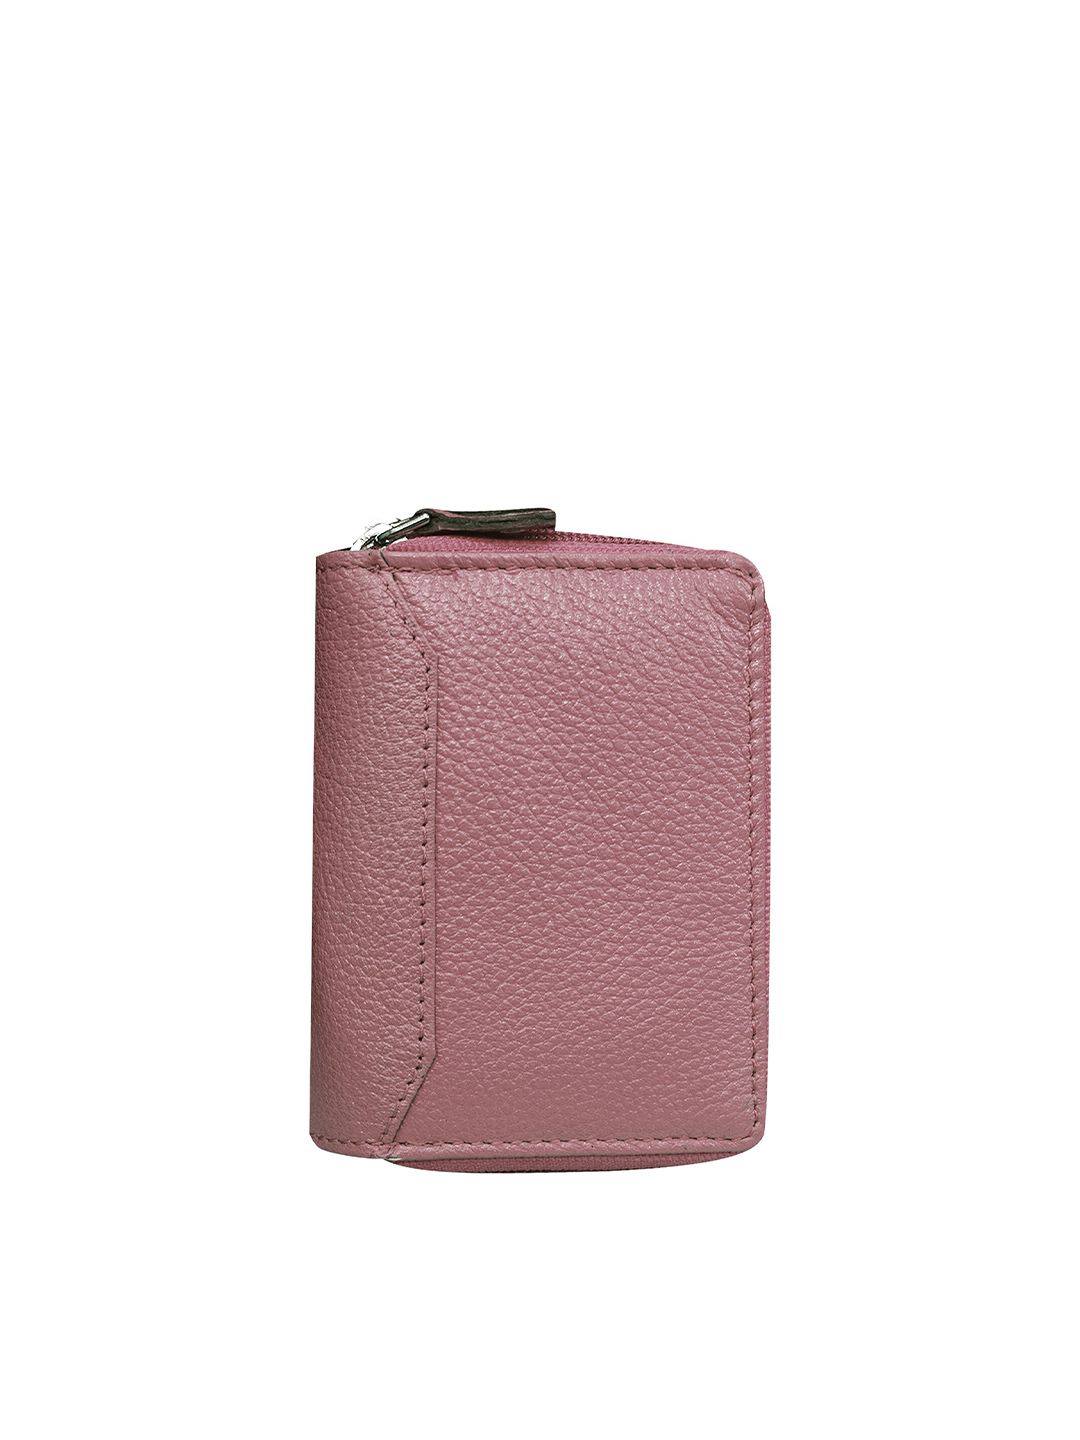 ABYS Unisex Pink Leather Zip Around Wallet Price in India